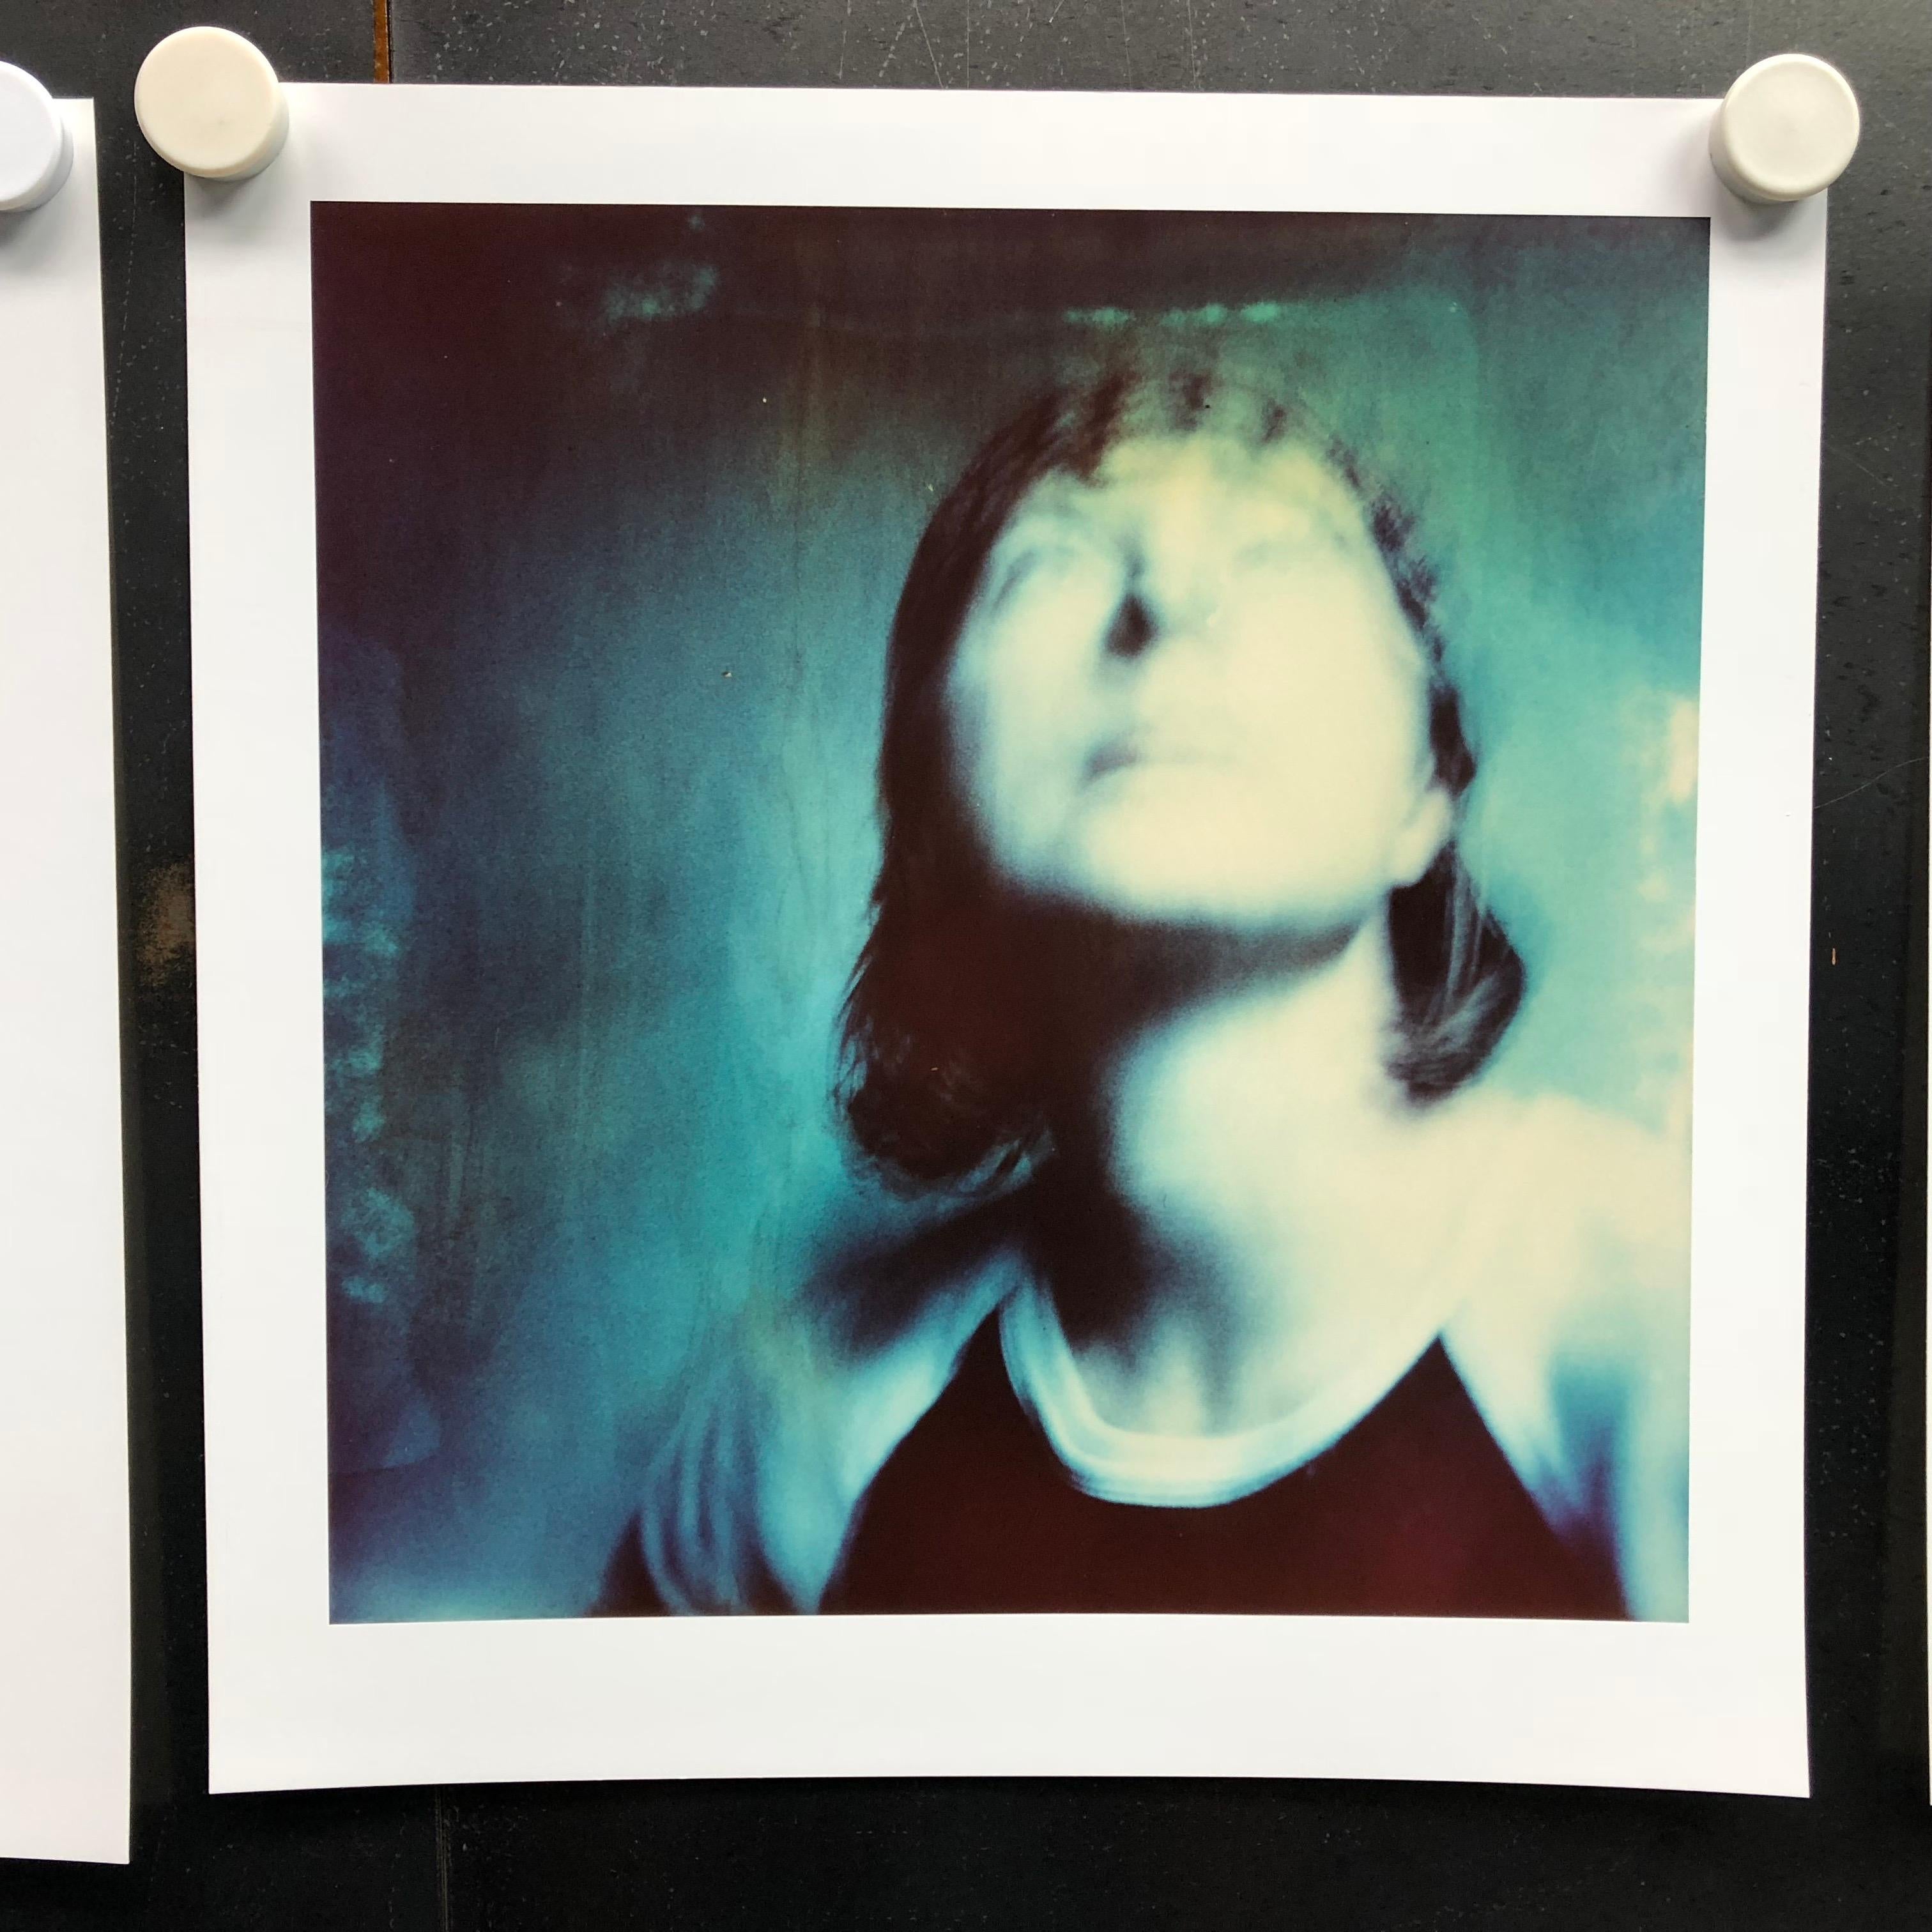 'Max Blue', triptych (The Last Picture Show), 2005, 
each 38x36cm, 38x122cm installed, Edition 1/5, 
3 analog C-Prints, hand-printed by the artist on Fuji Crystal Achive Paper, matte finish, 
based on three Polaroids. 
Certificate and signature